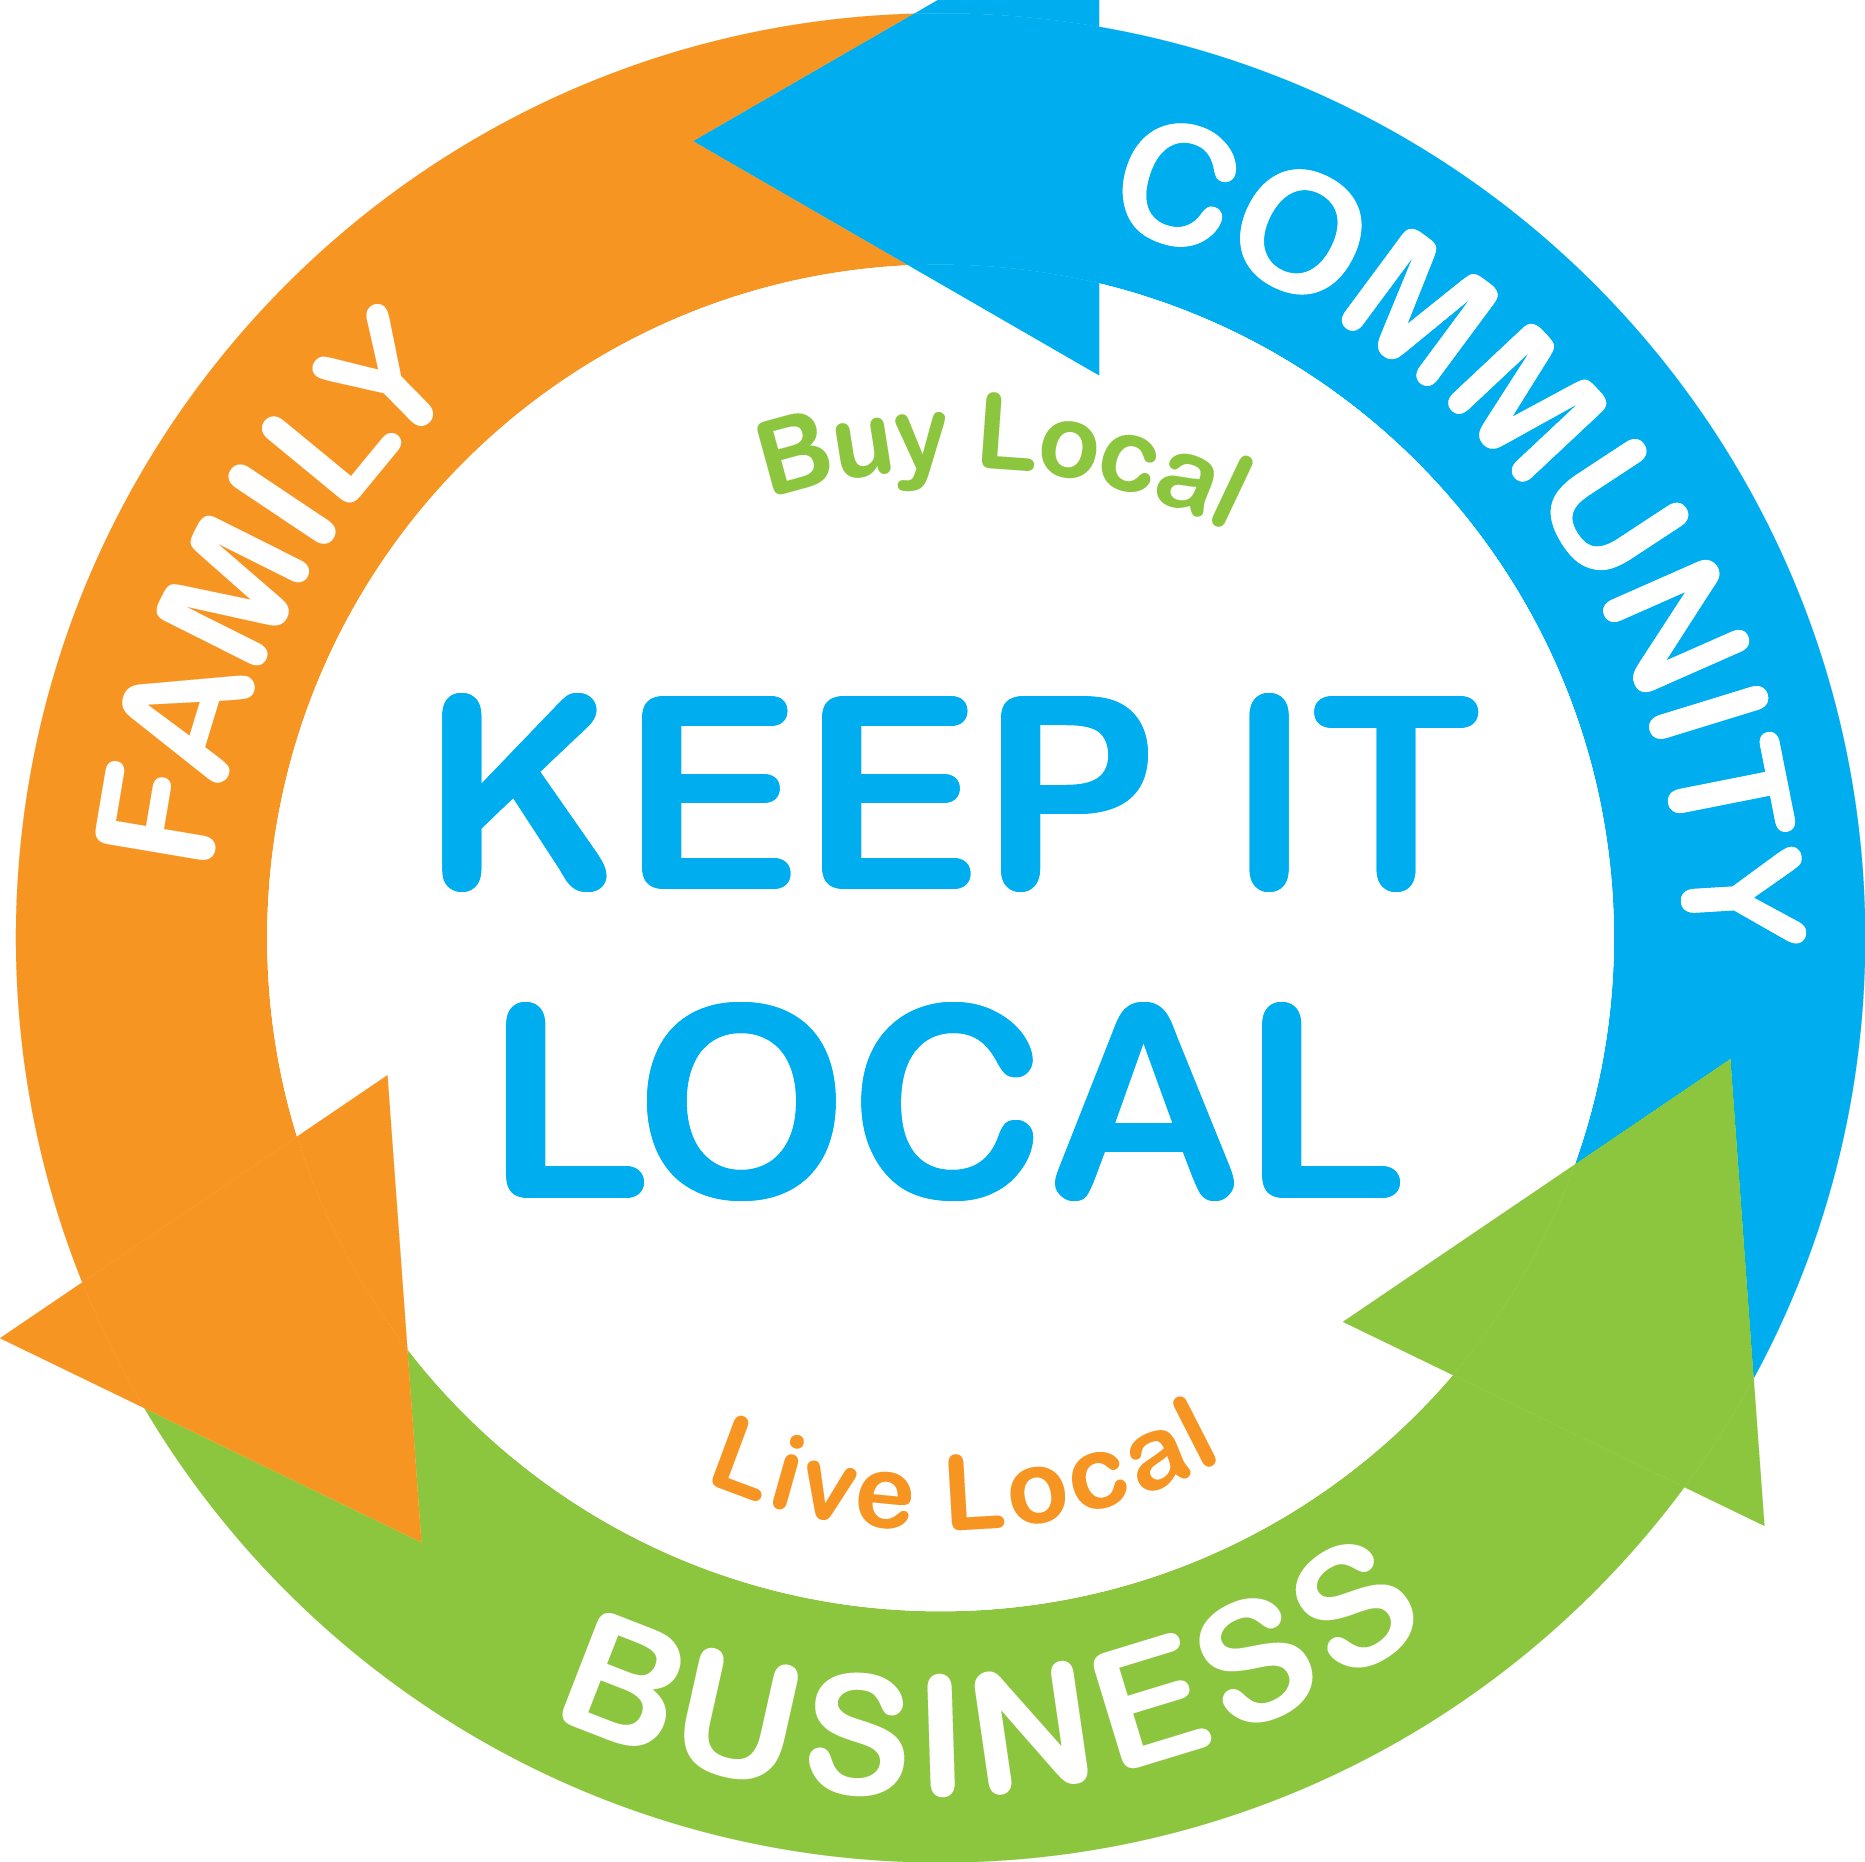 Own a local business? Join the KeepIt805 Family.